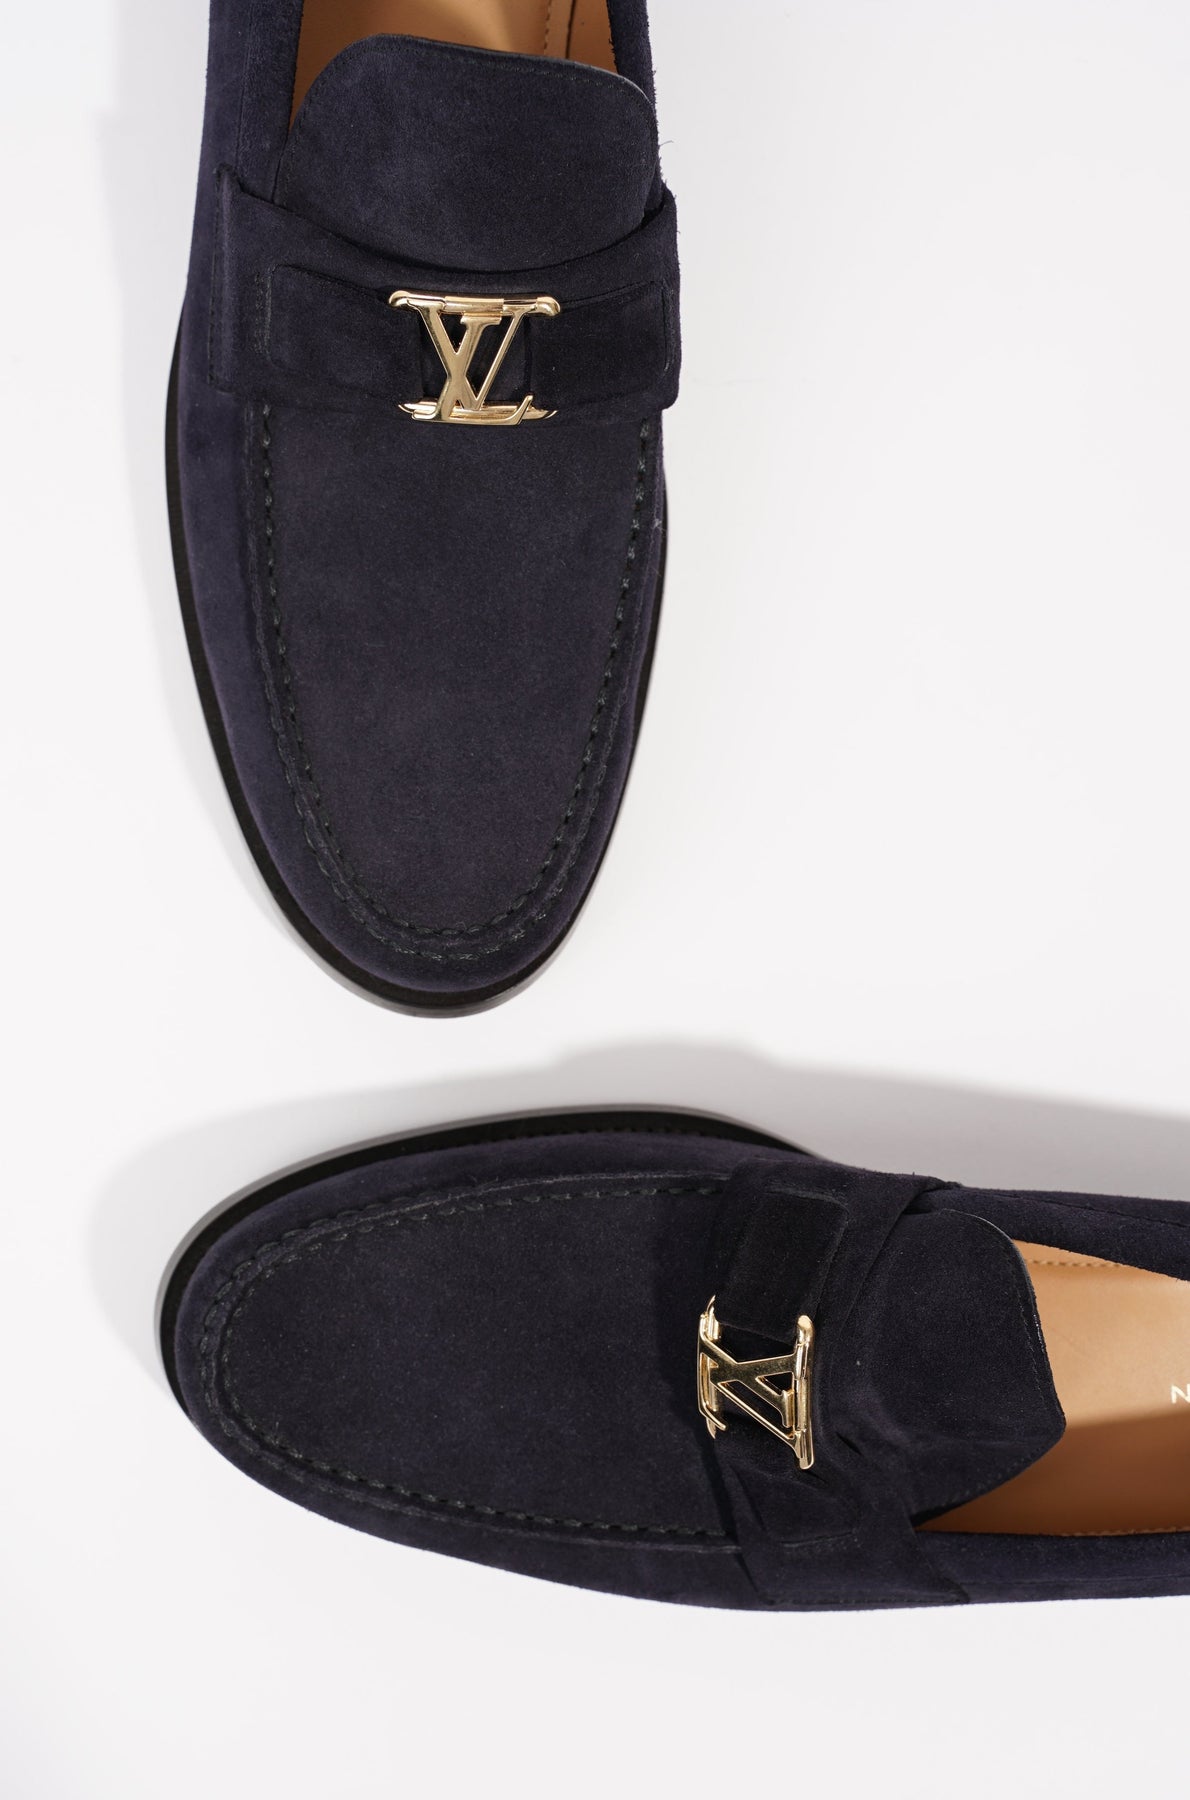 Louis Vuittons Men Loafers For Sale